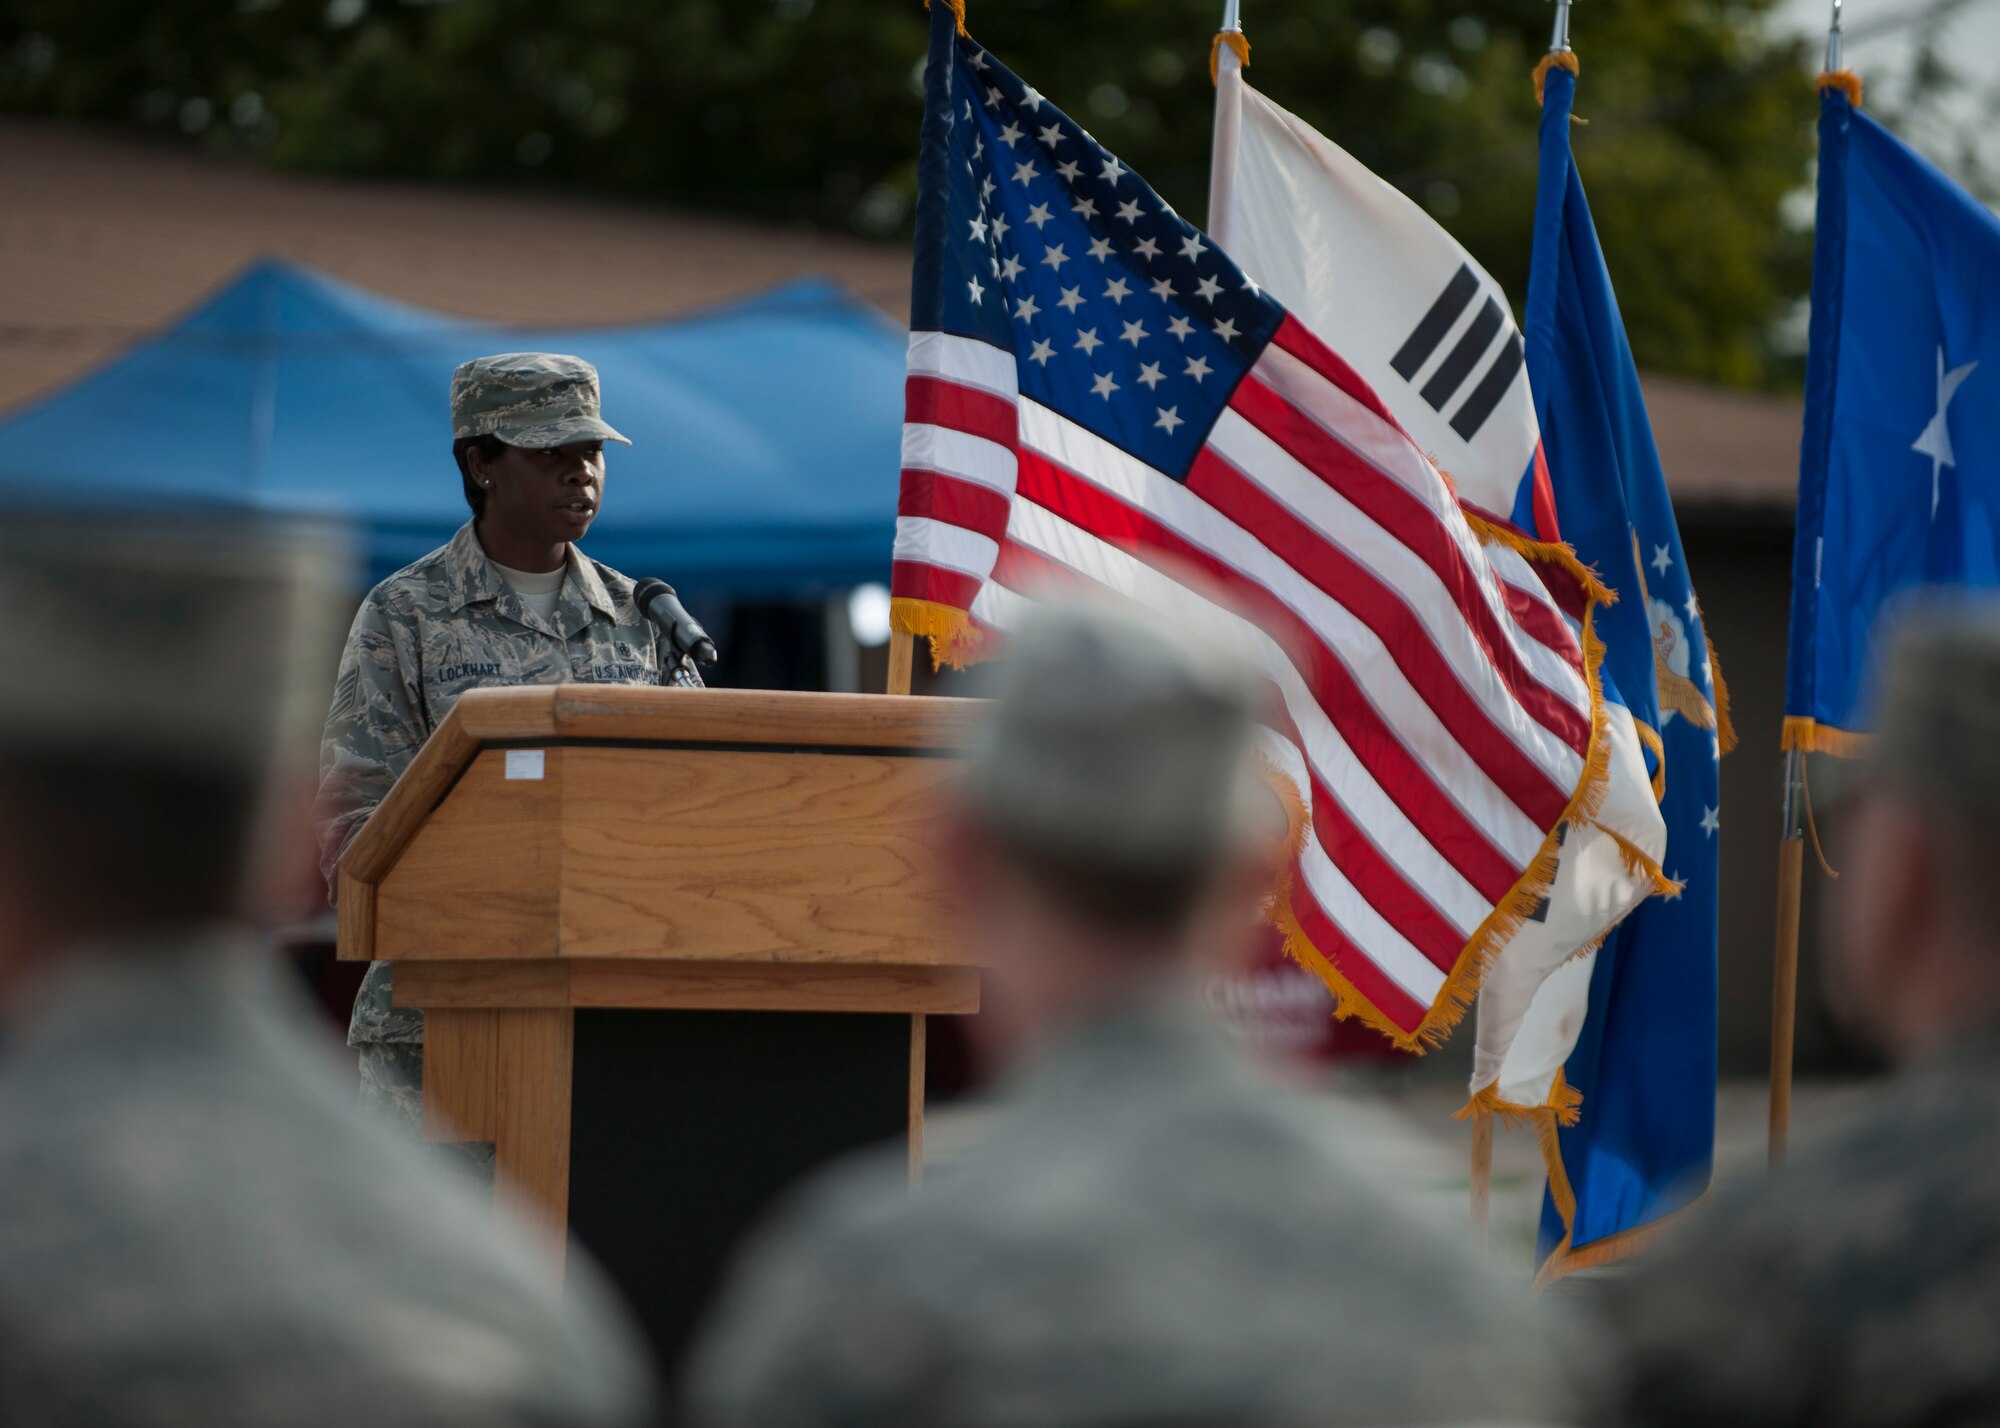 U.S. Air Force Tech. Sgt. Chanute Lockhart, 8th Medical Operations Squadron emergency services tech, speaks during the closing ceremony of the POW/MIA Recognition Day at Kunsan Air Base, Republic of Korea, Sept. 15, 2017. The day was established by an Act of Congress, by the passage of Section 1082 of the 1998 Defense Authorization Act and is one of six days that the POW/MIA Flag can be flown. (U.S. Air Force photo by Staff Sgt. Victoria H. Taylor)